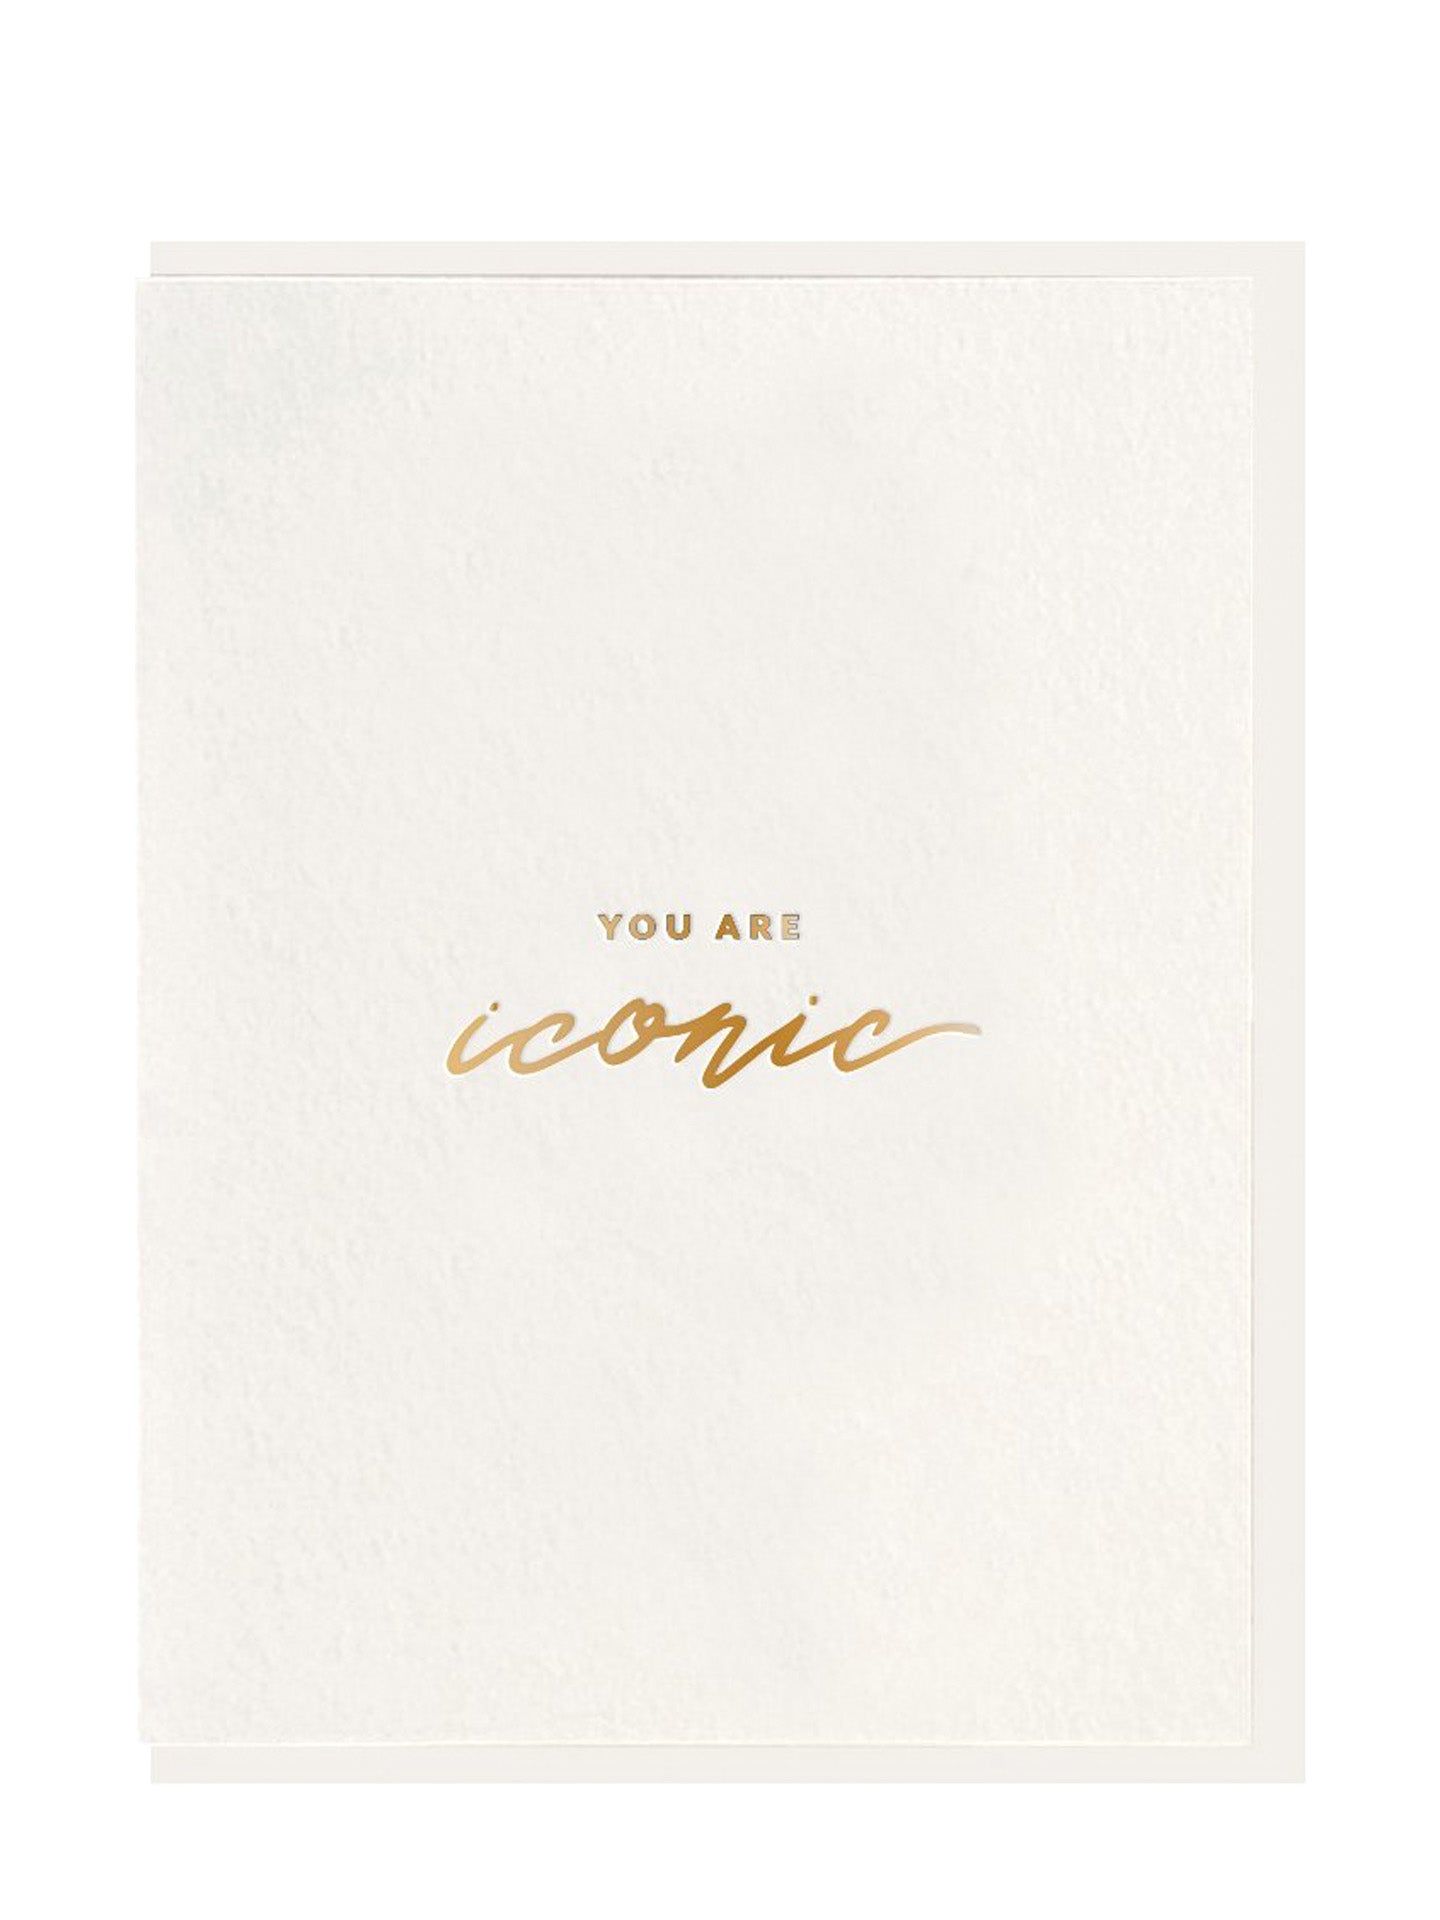 Iconic - Foil Everyday Greeting Card